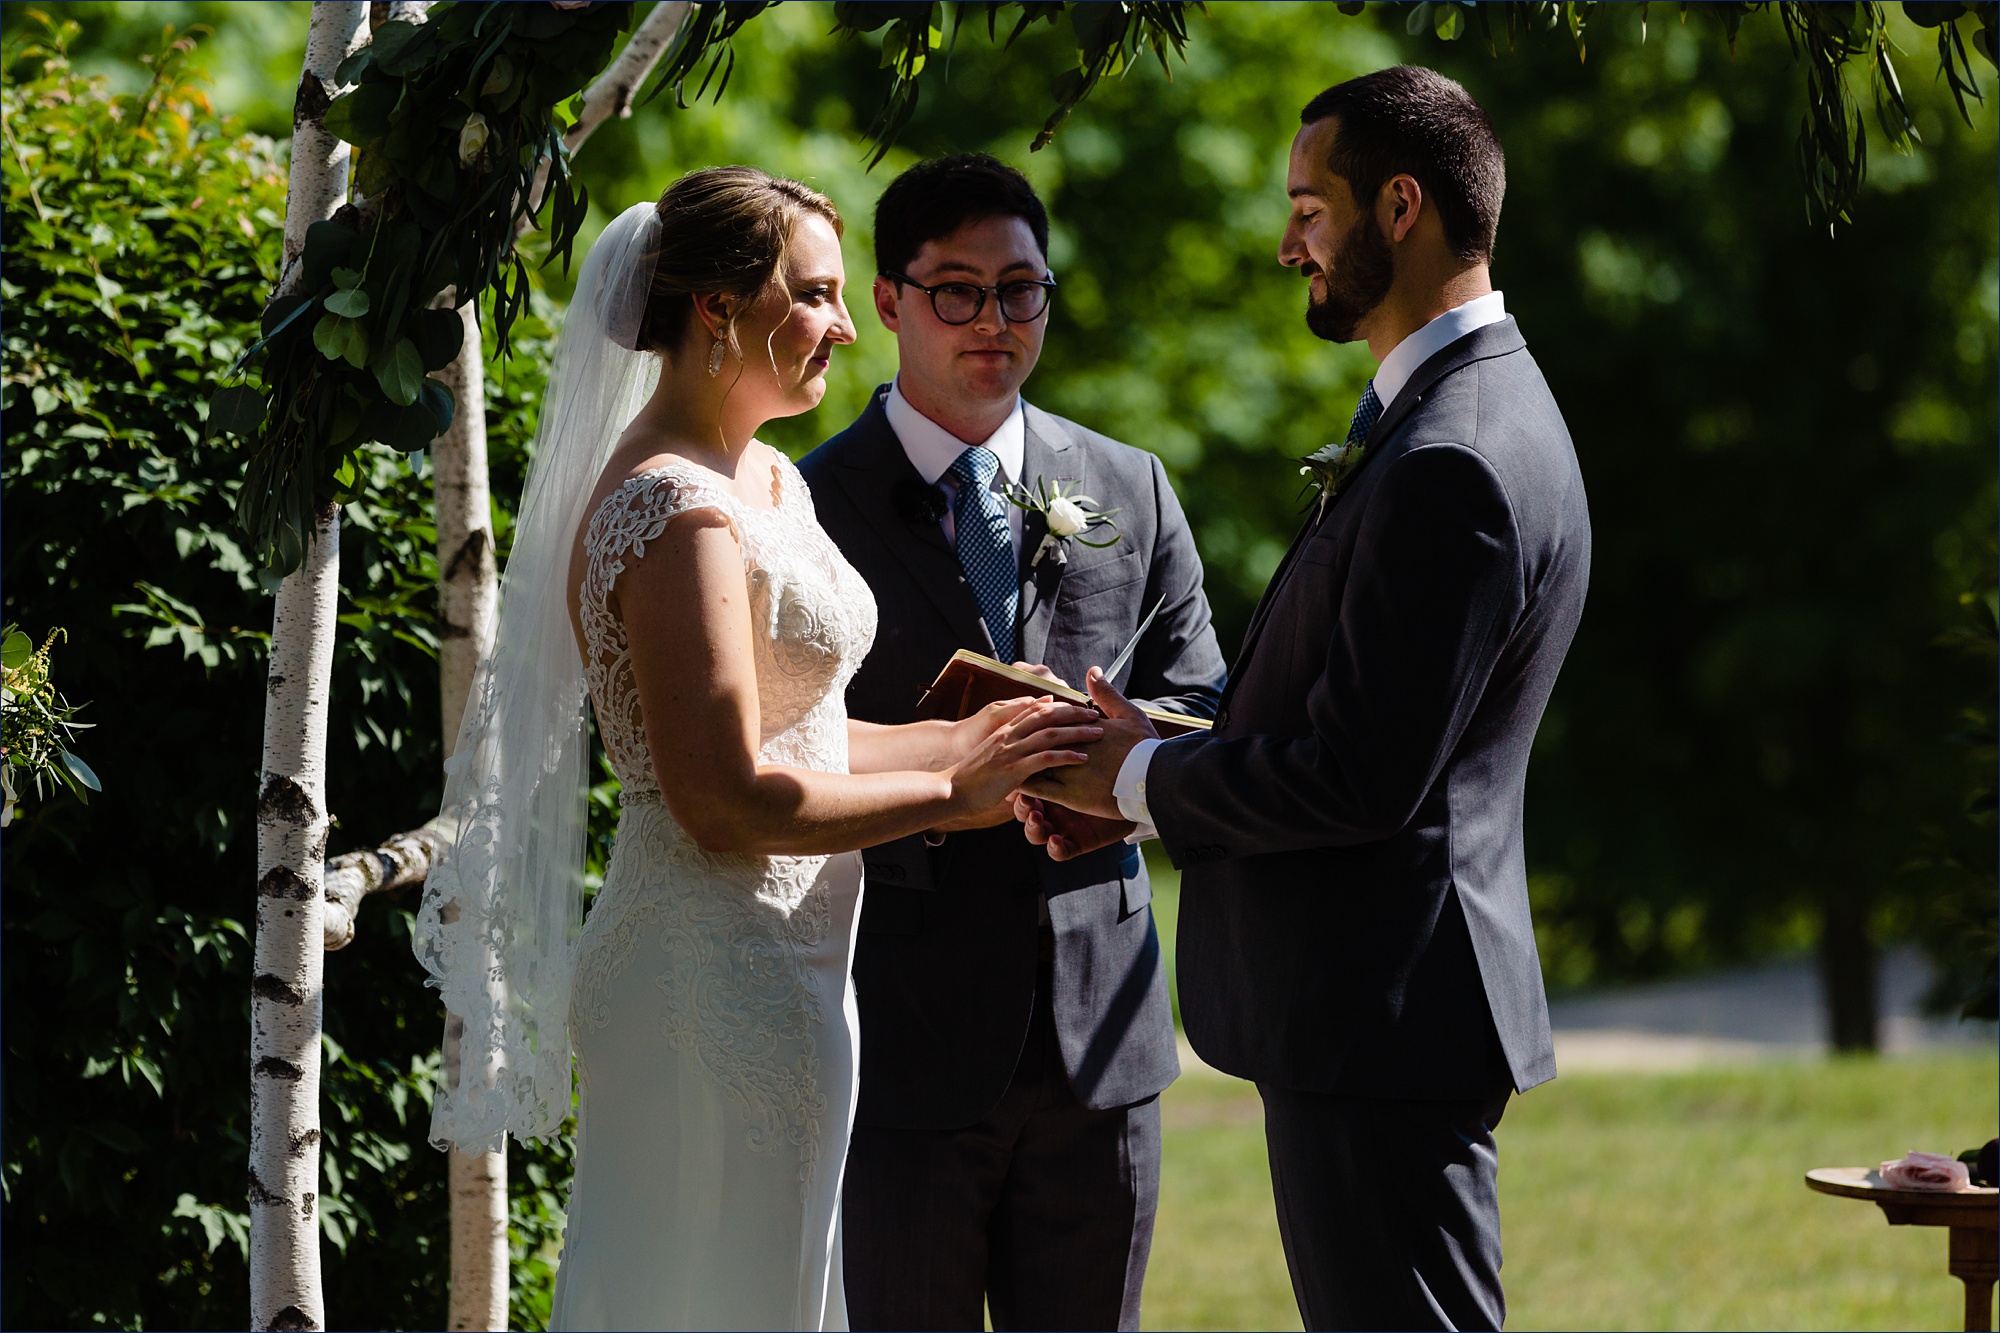 The bride and groom exchange rings during their outdoor ceremony at The Preserve at Chocorua in NH